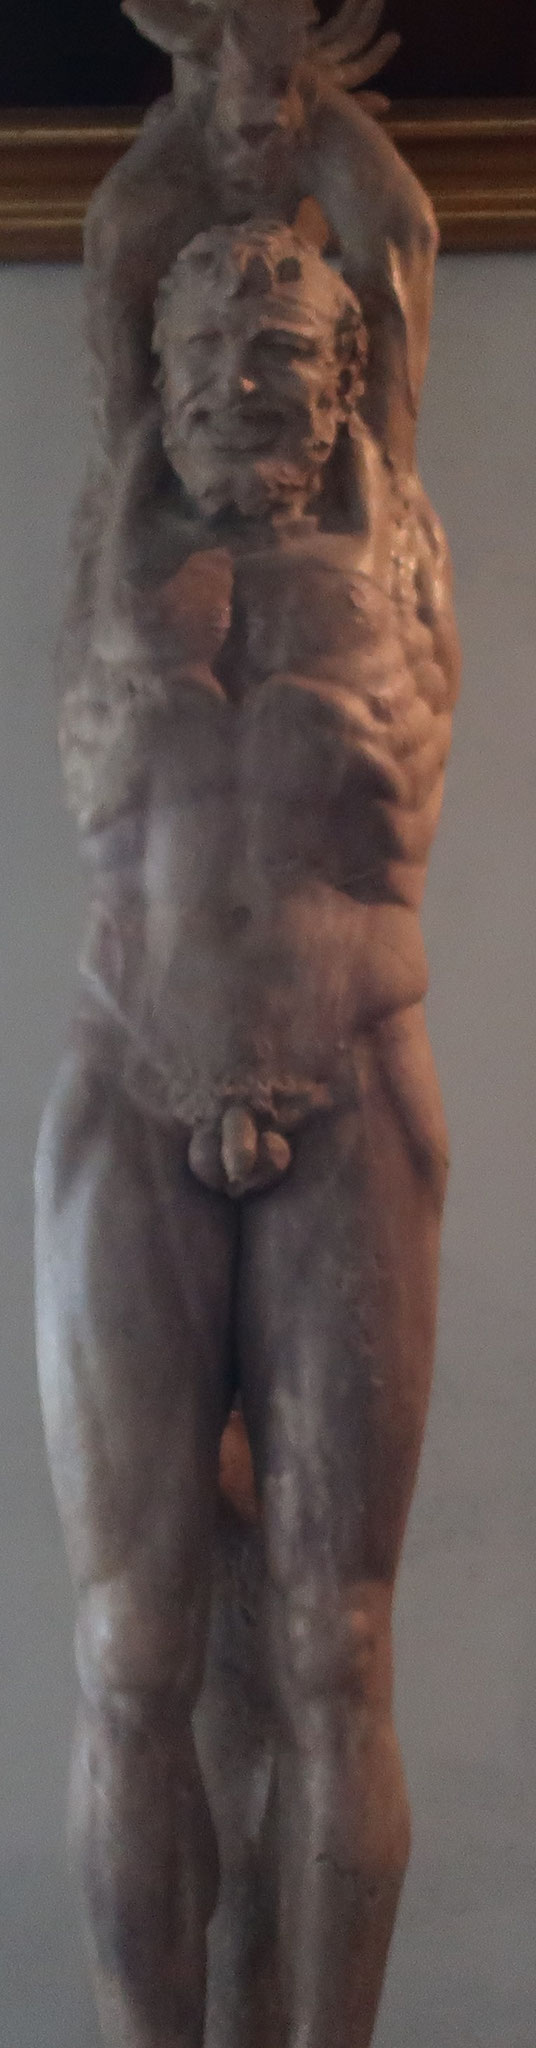 Another Marsyas Statue with Its Skin Removed (2nd Century), Uffizi Gallery